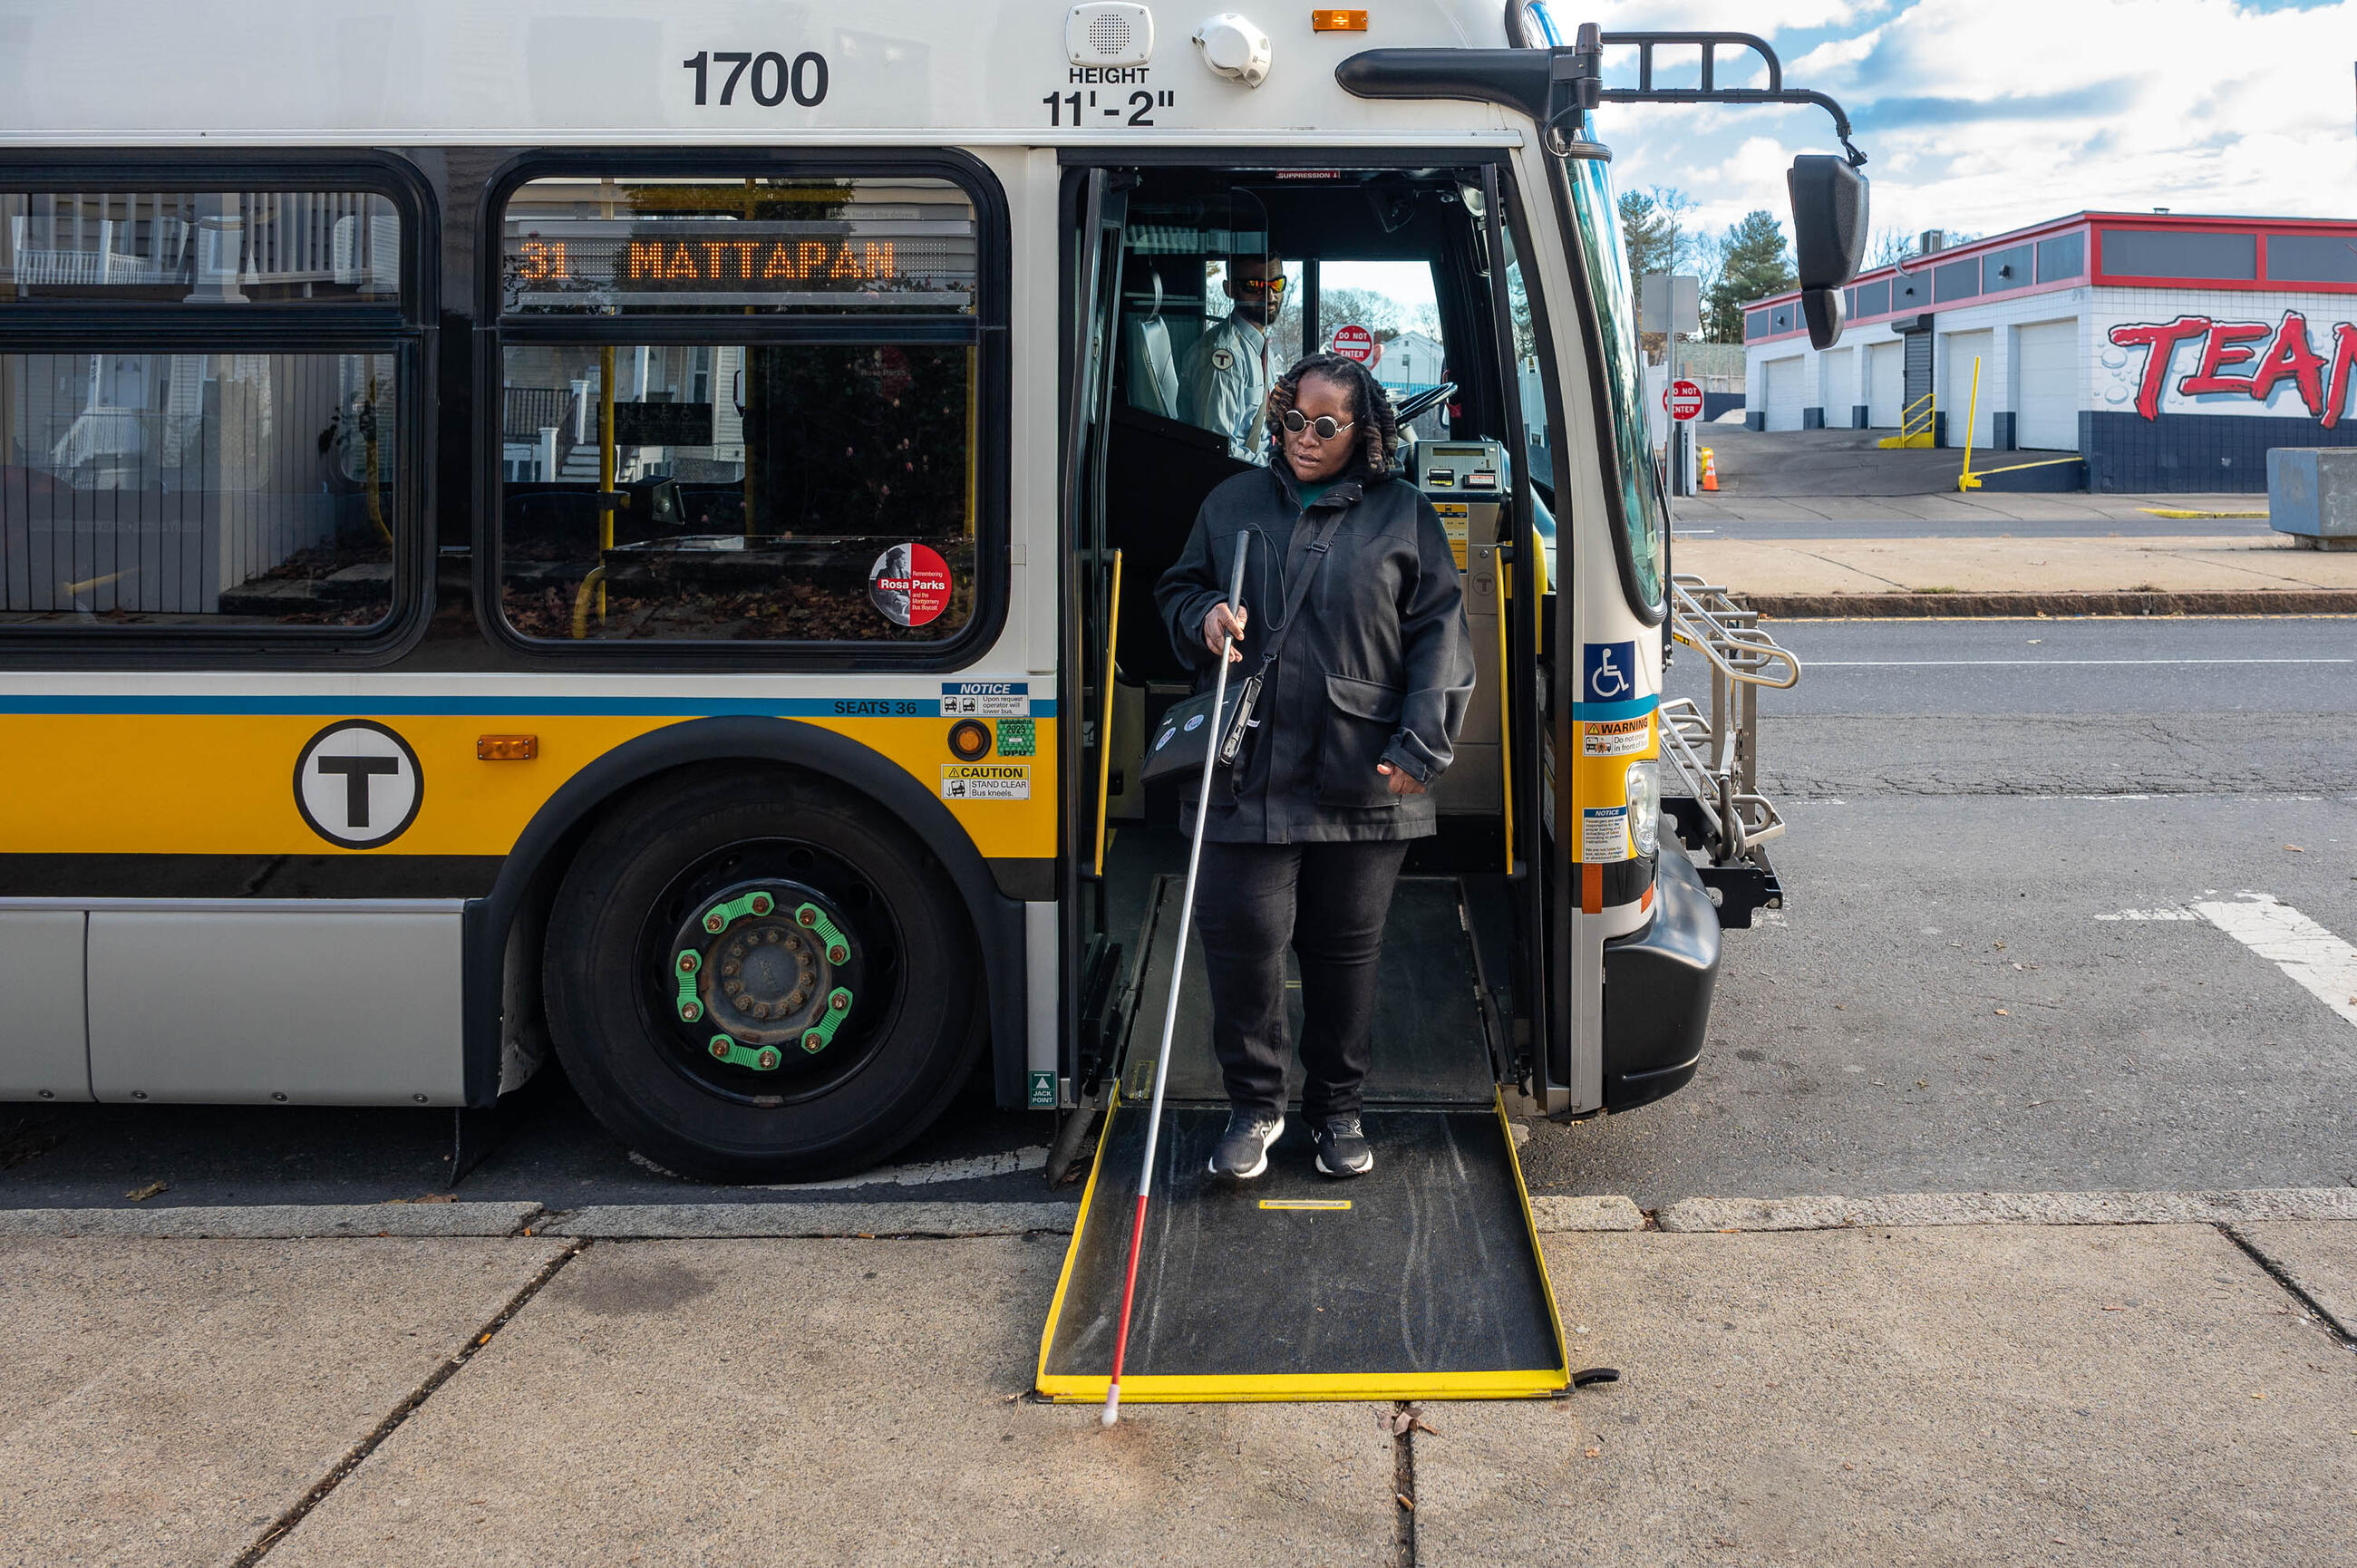 a blind or low vision rider using a white cane while exiting a Mattapan-bound bus via the bus door ramp